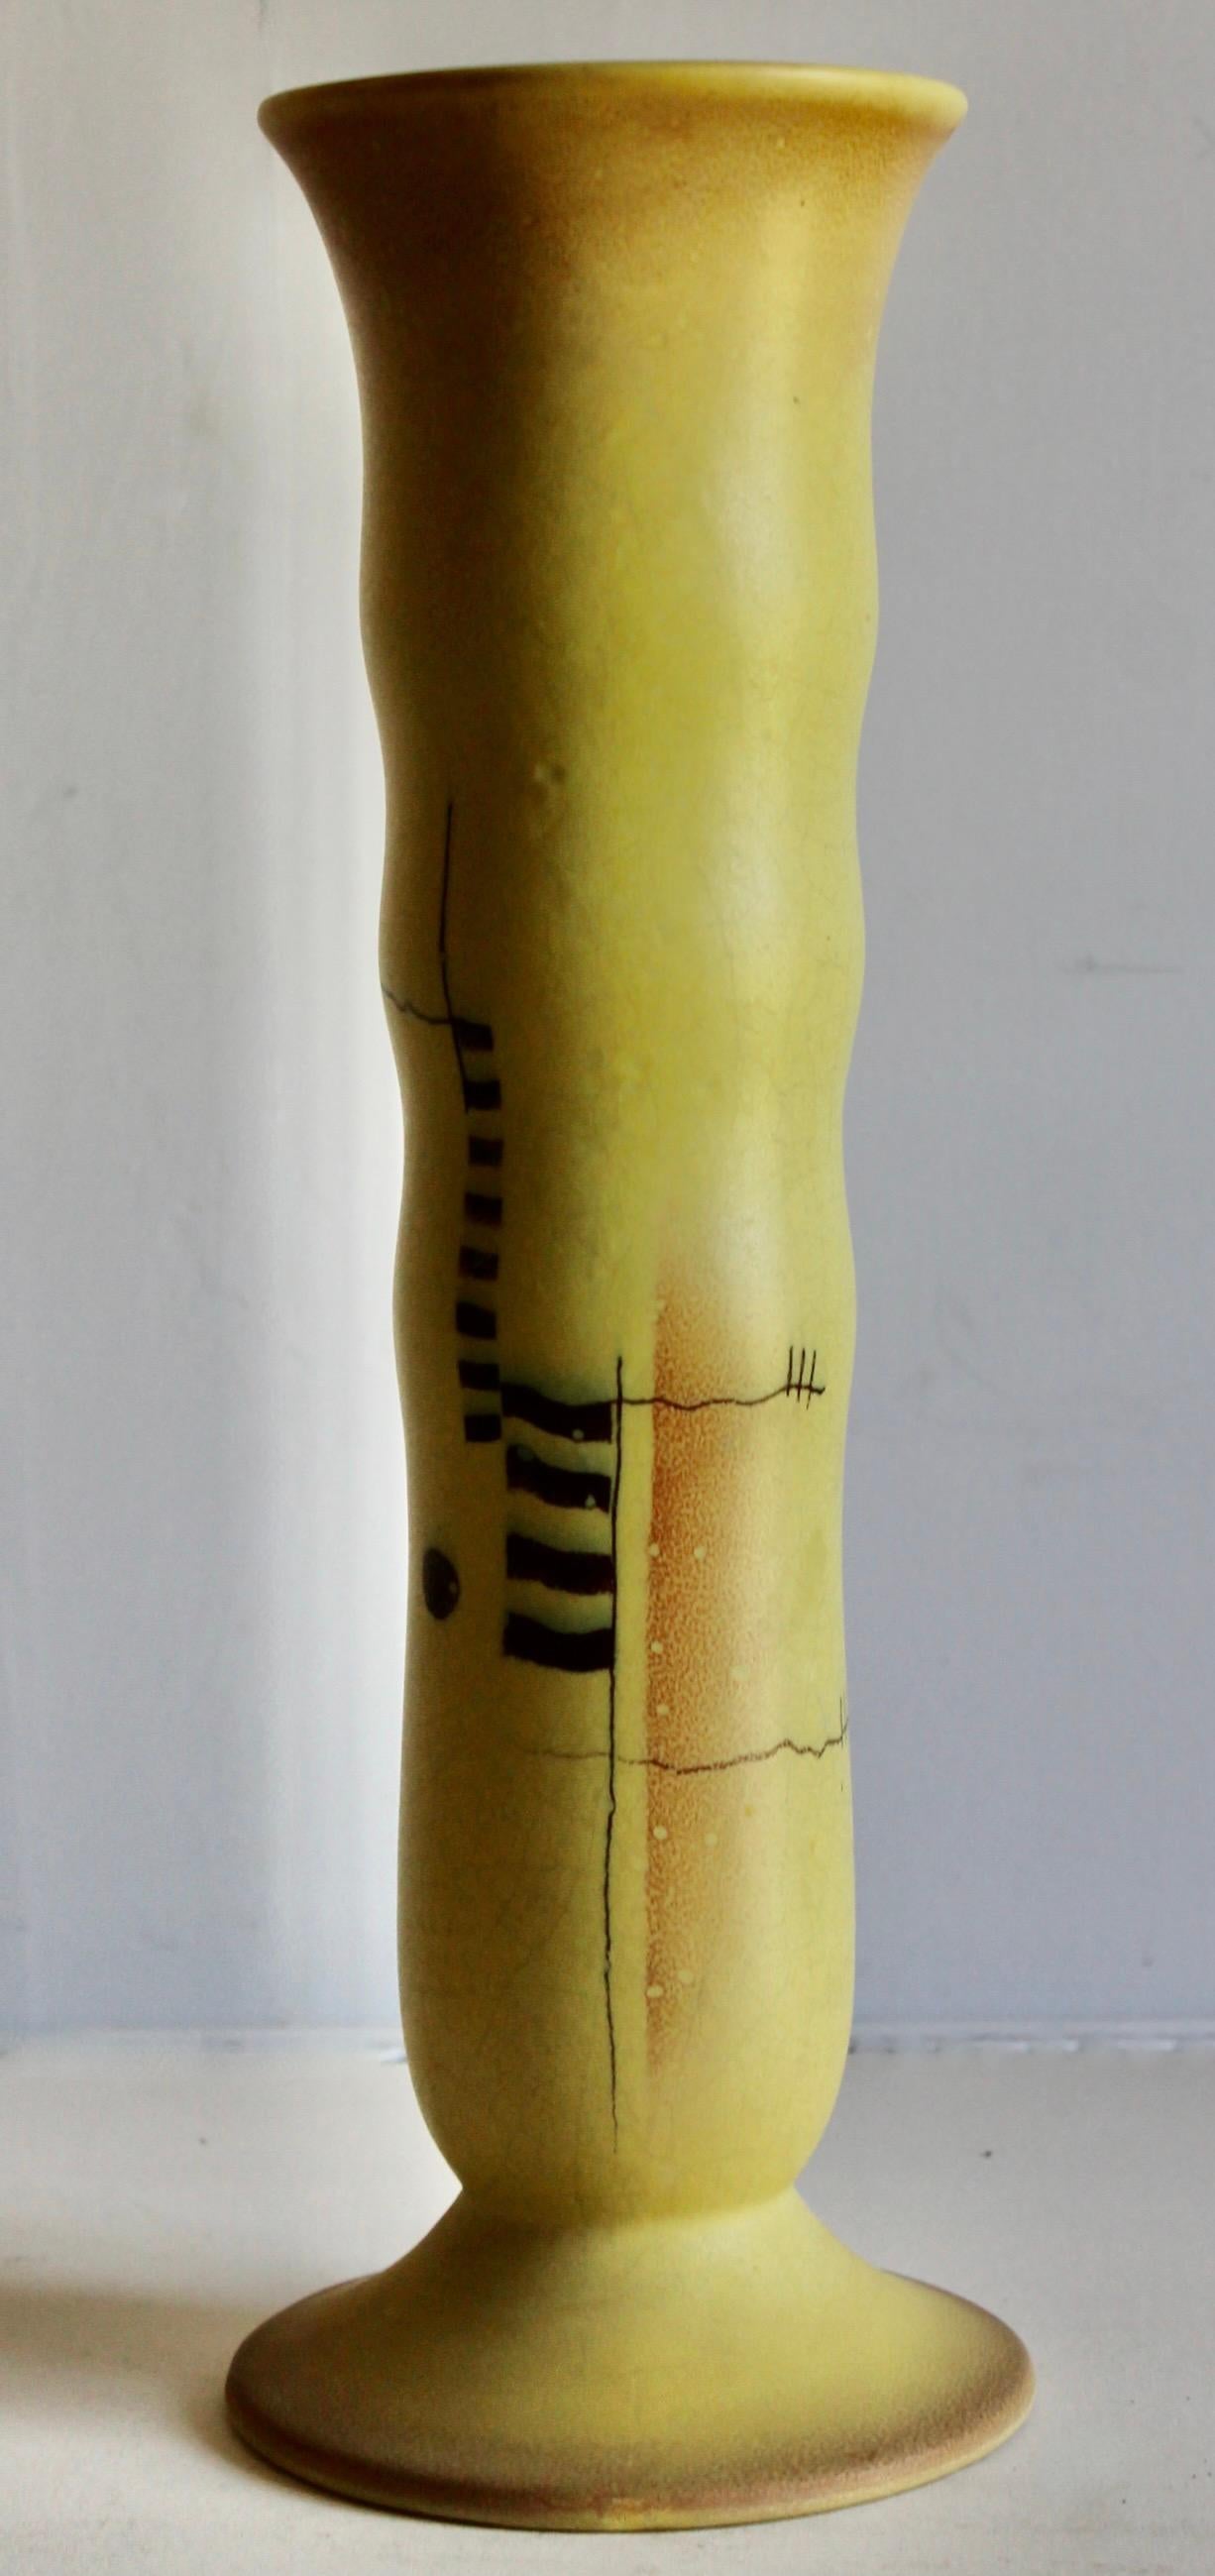 An unusually tall (15.5) and bright ceramic vase from one of the commercial potteries where Bauhaus or other related schools graduates to design and produce pottery in this new and radical style. The undulating vertical form,
bright yellow and